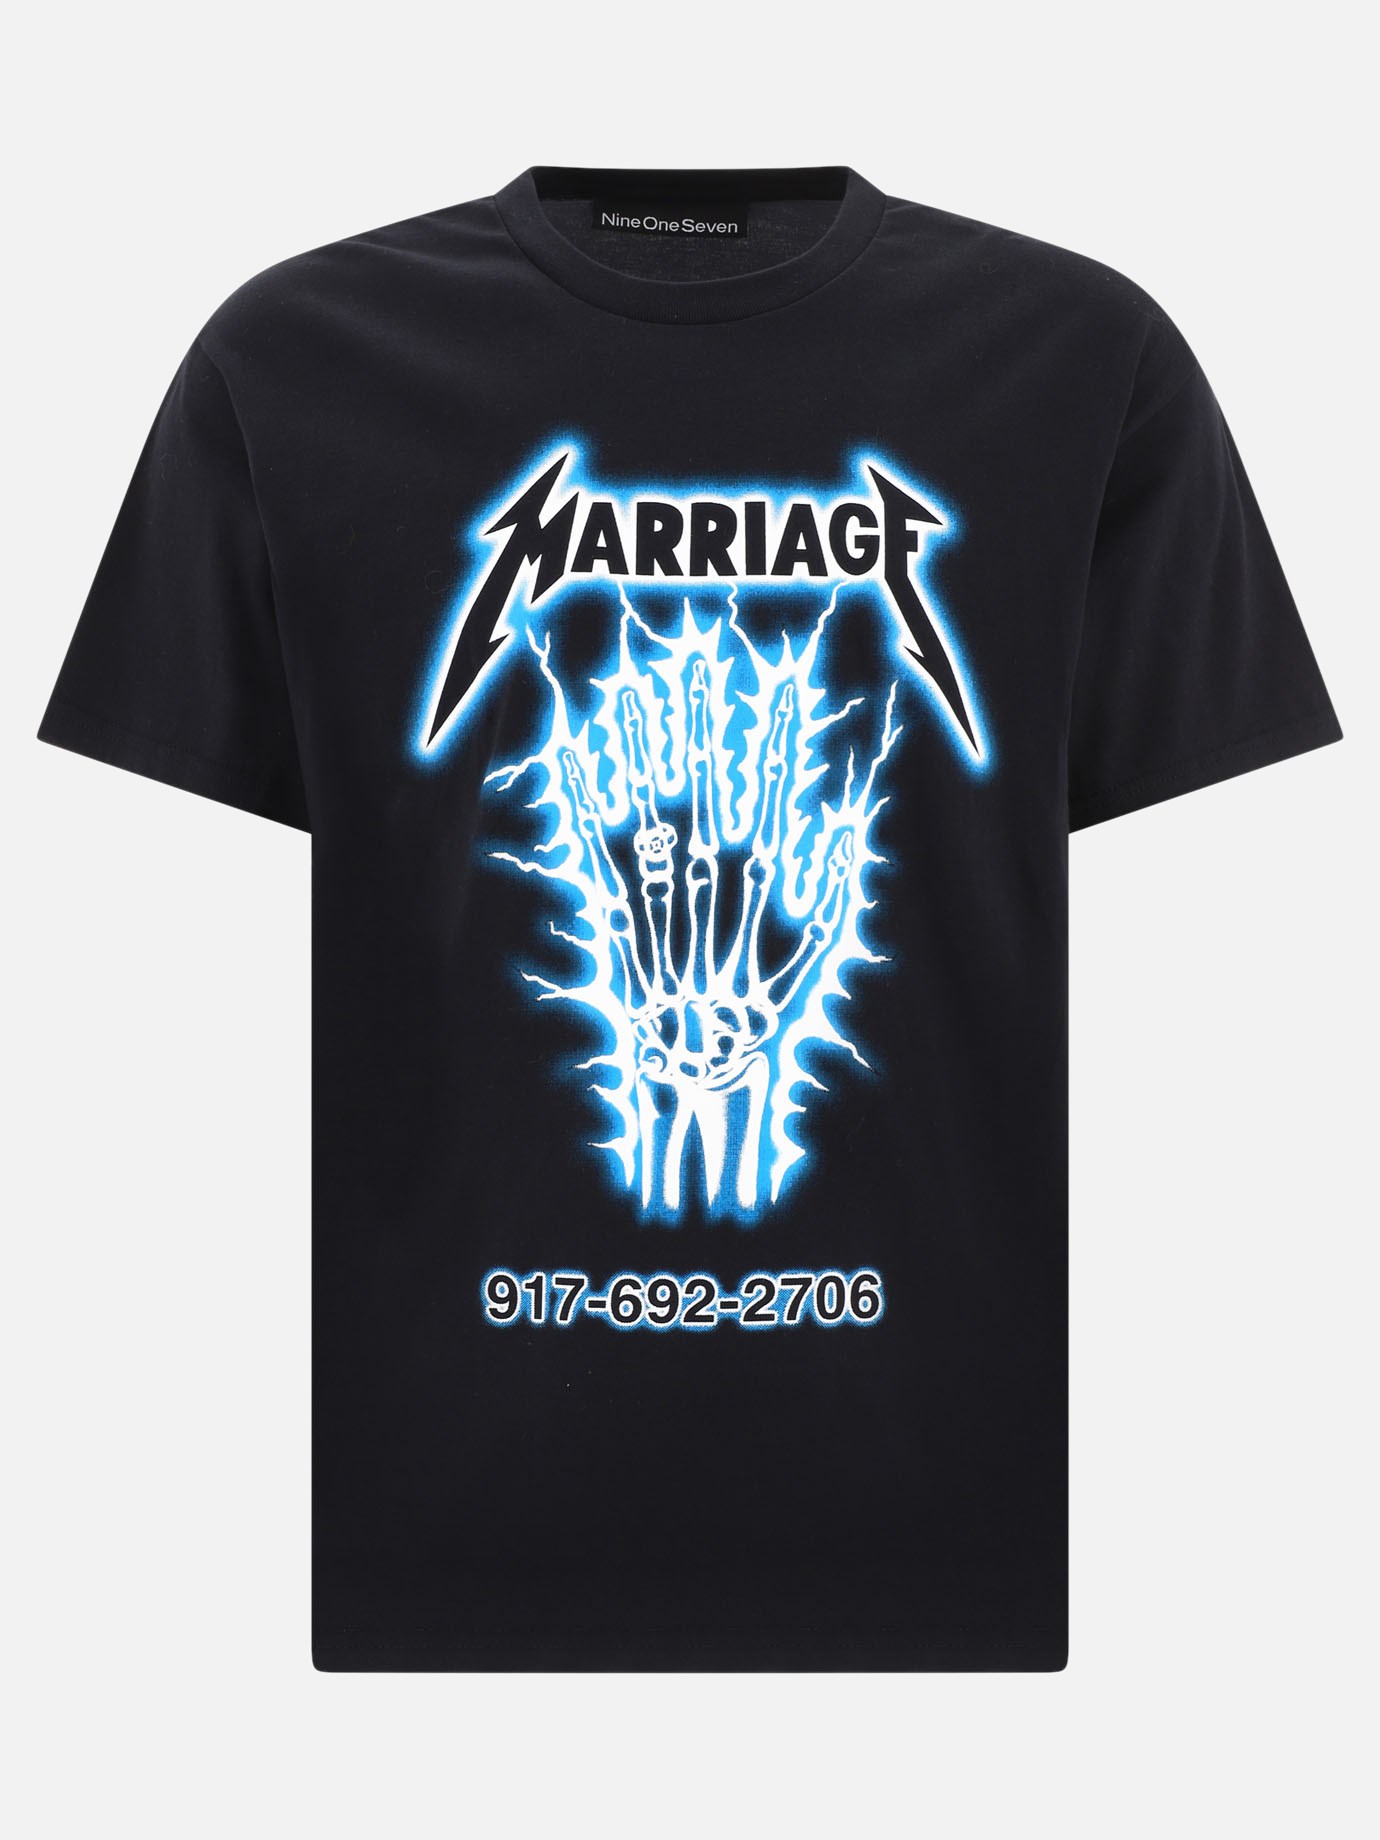  Marriage  t-shirtby Call Me 917 - 4